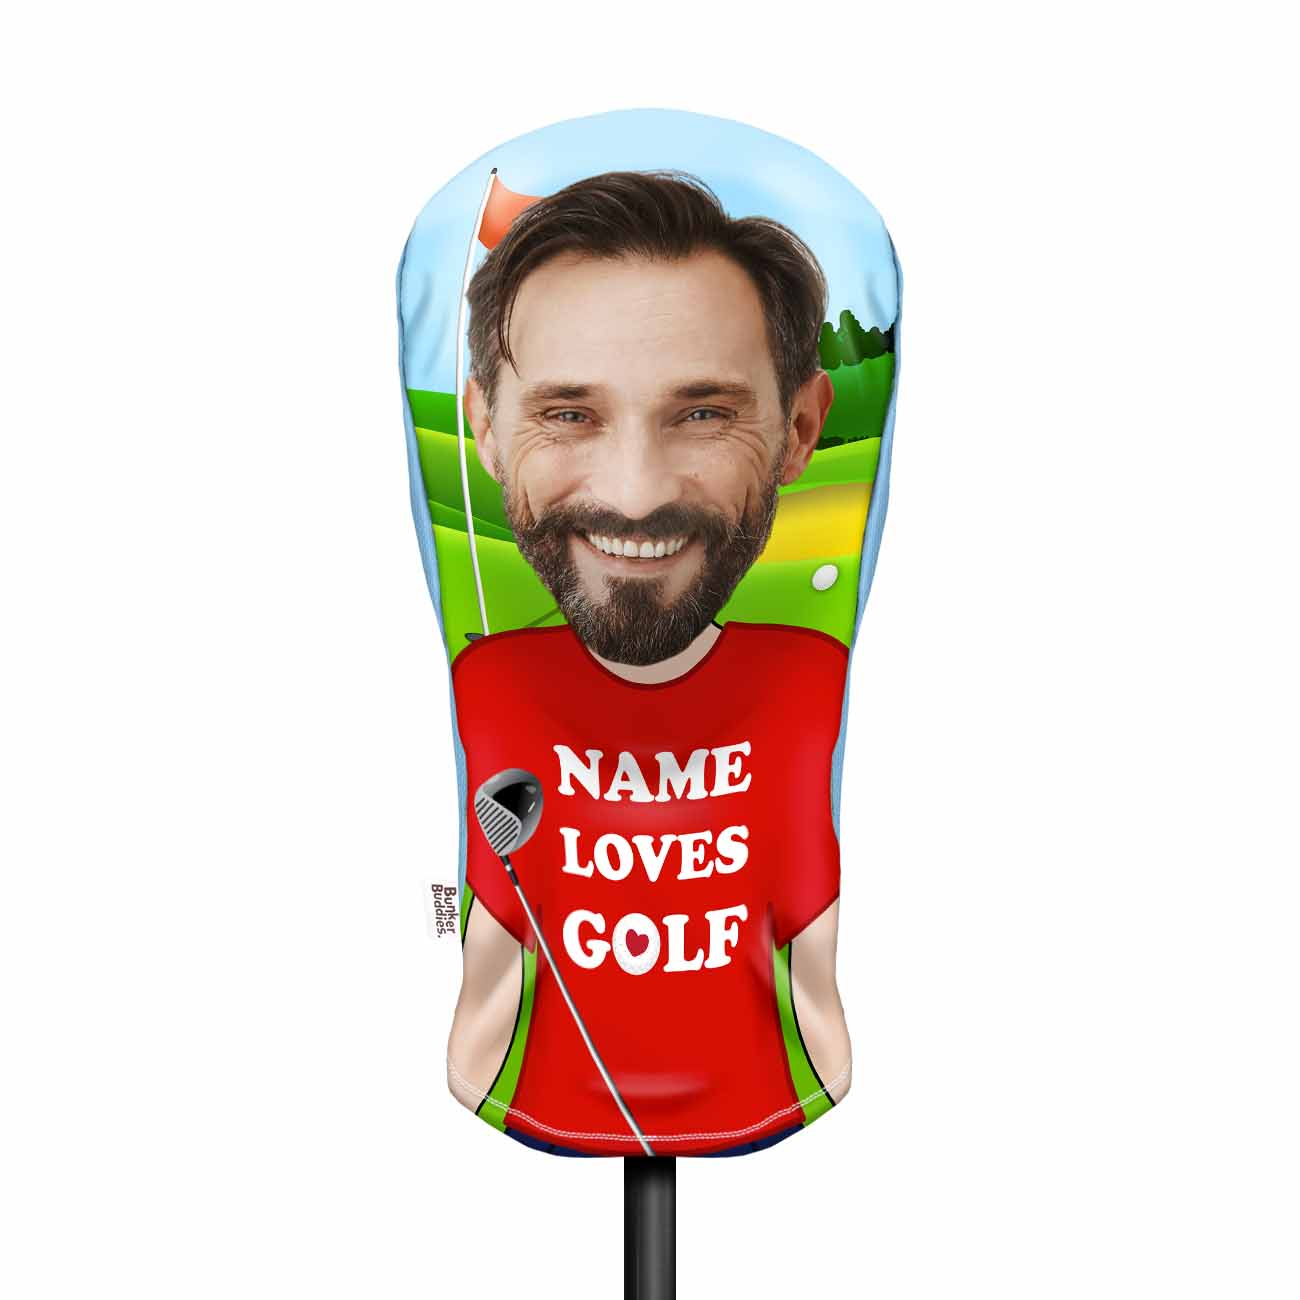 (Name) Loves Golf Personalised Golf Head Cover